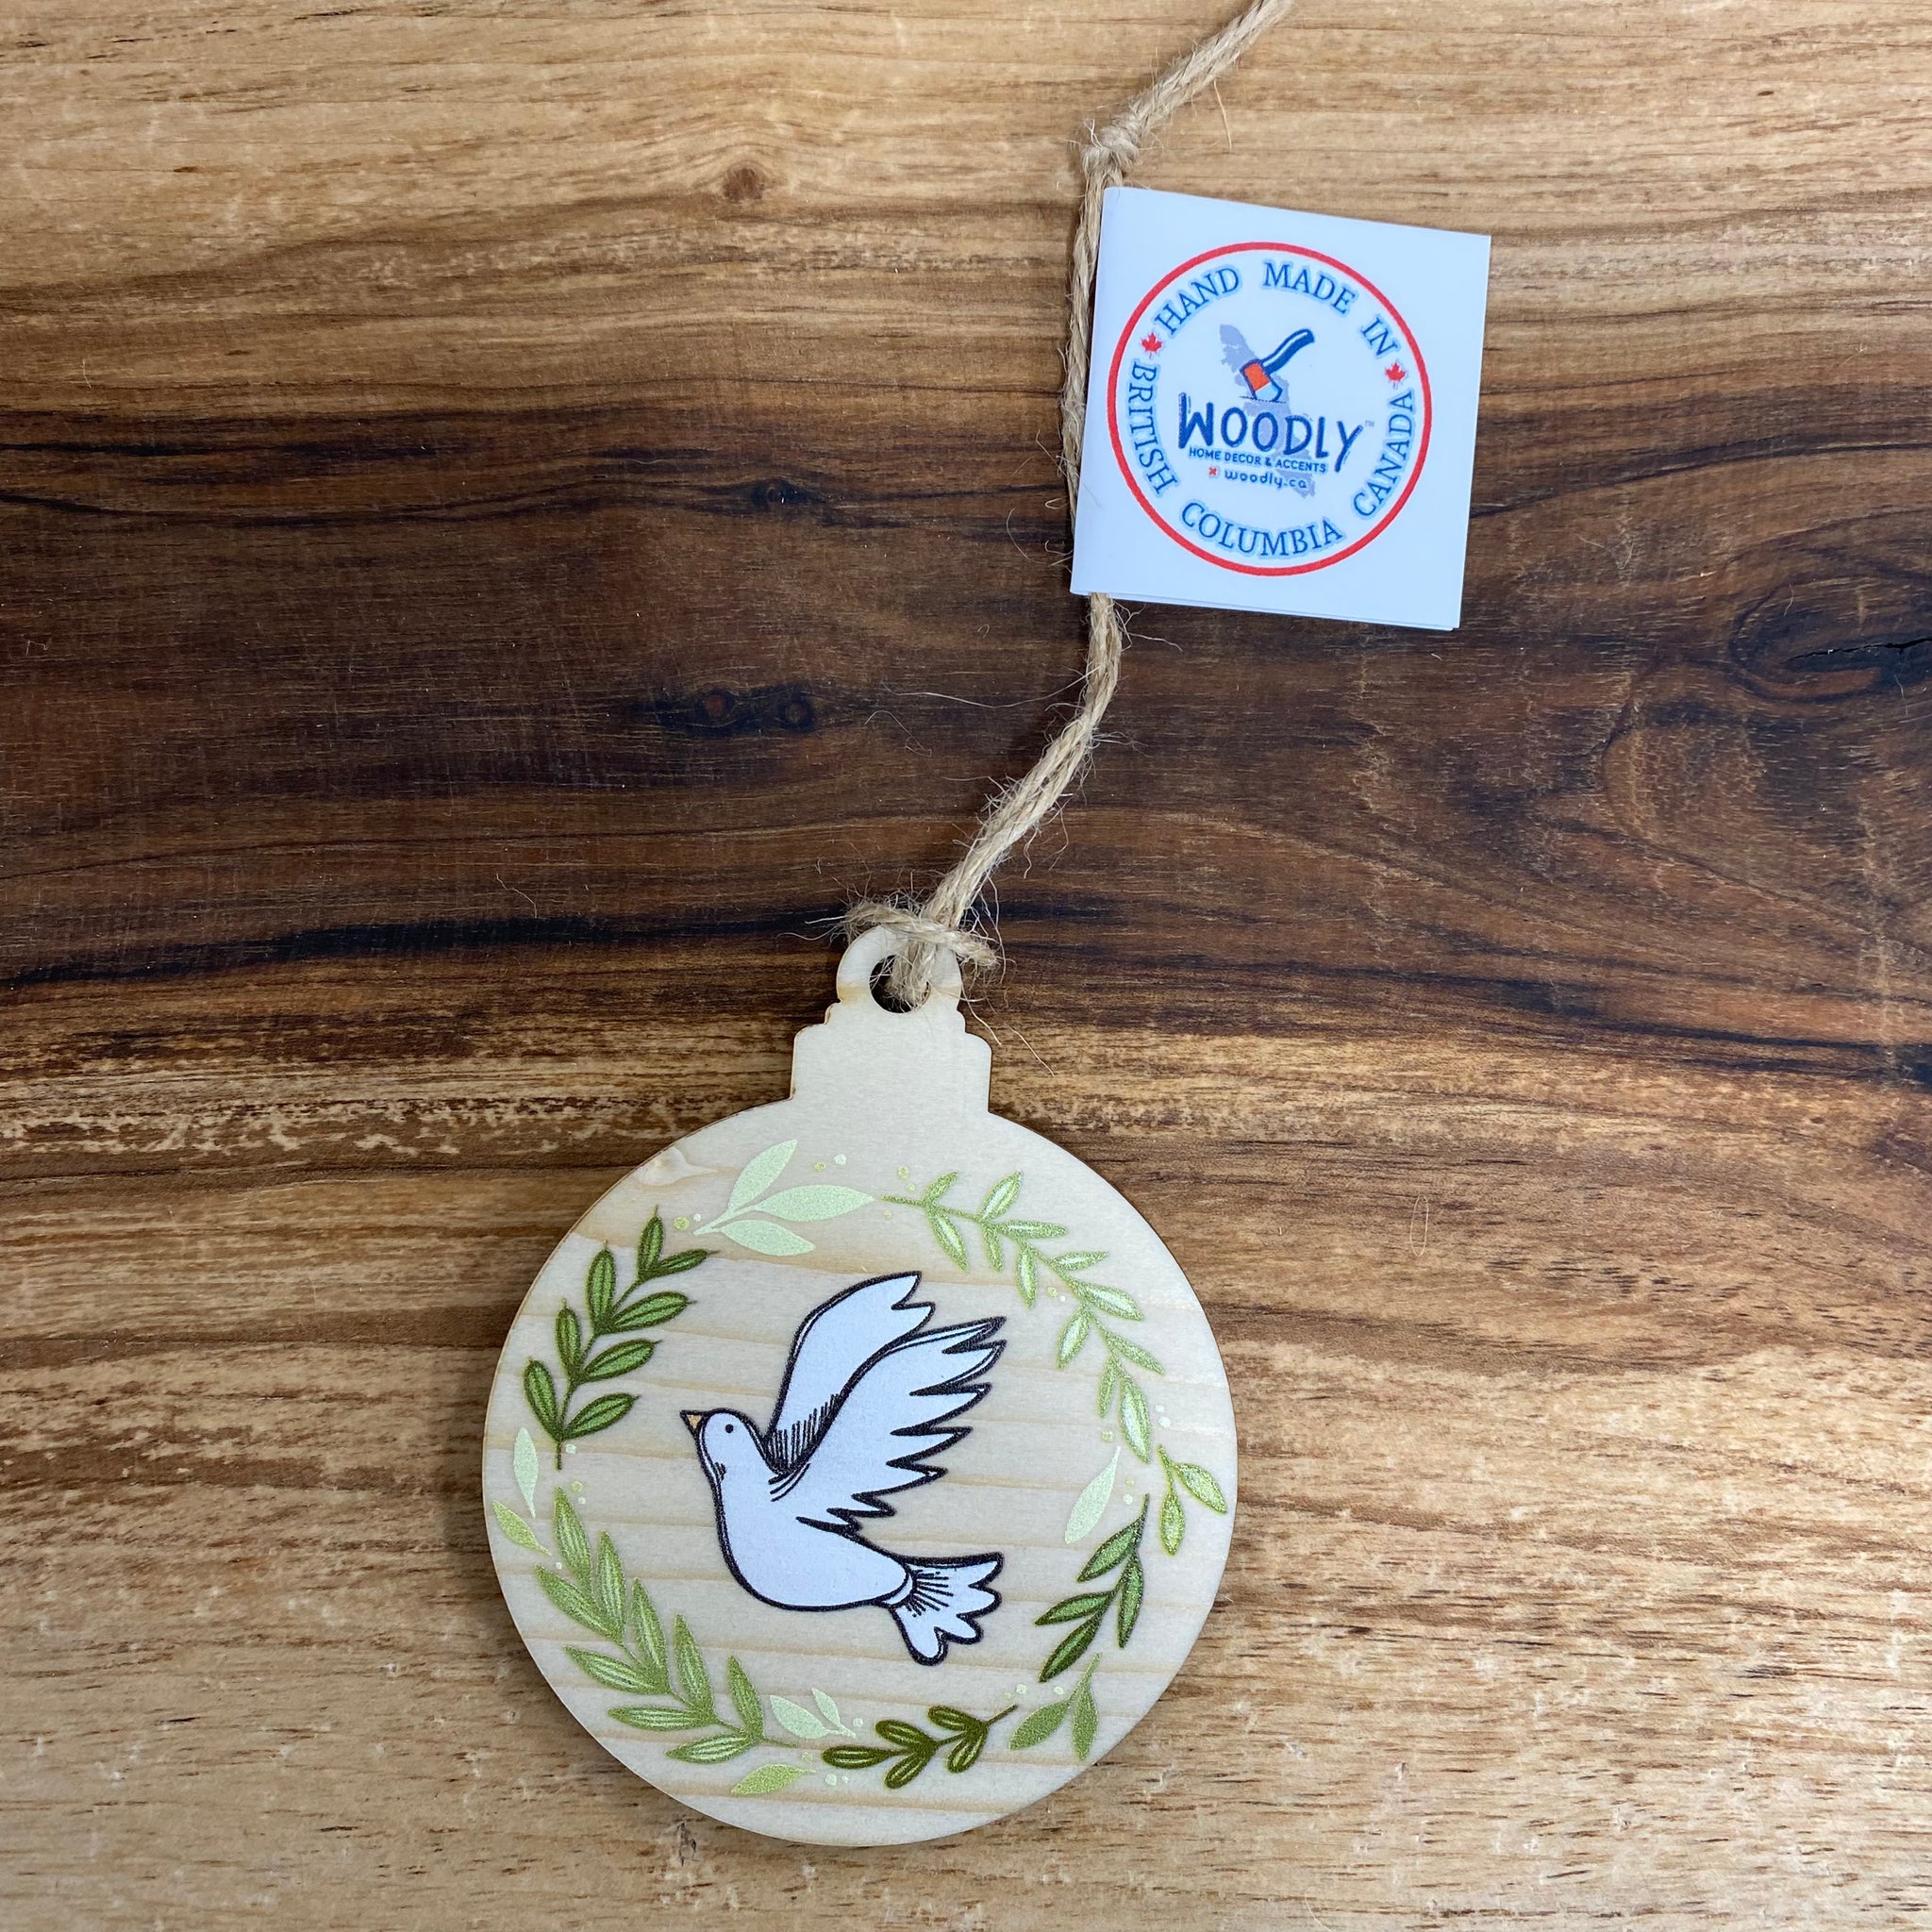 Woodly - Reclaimed Wood Holiday Ornaments